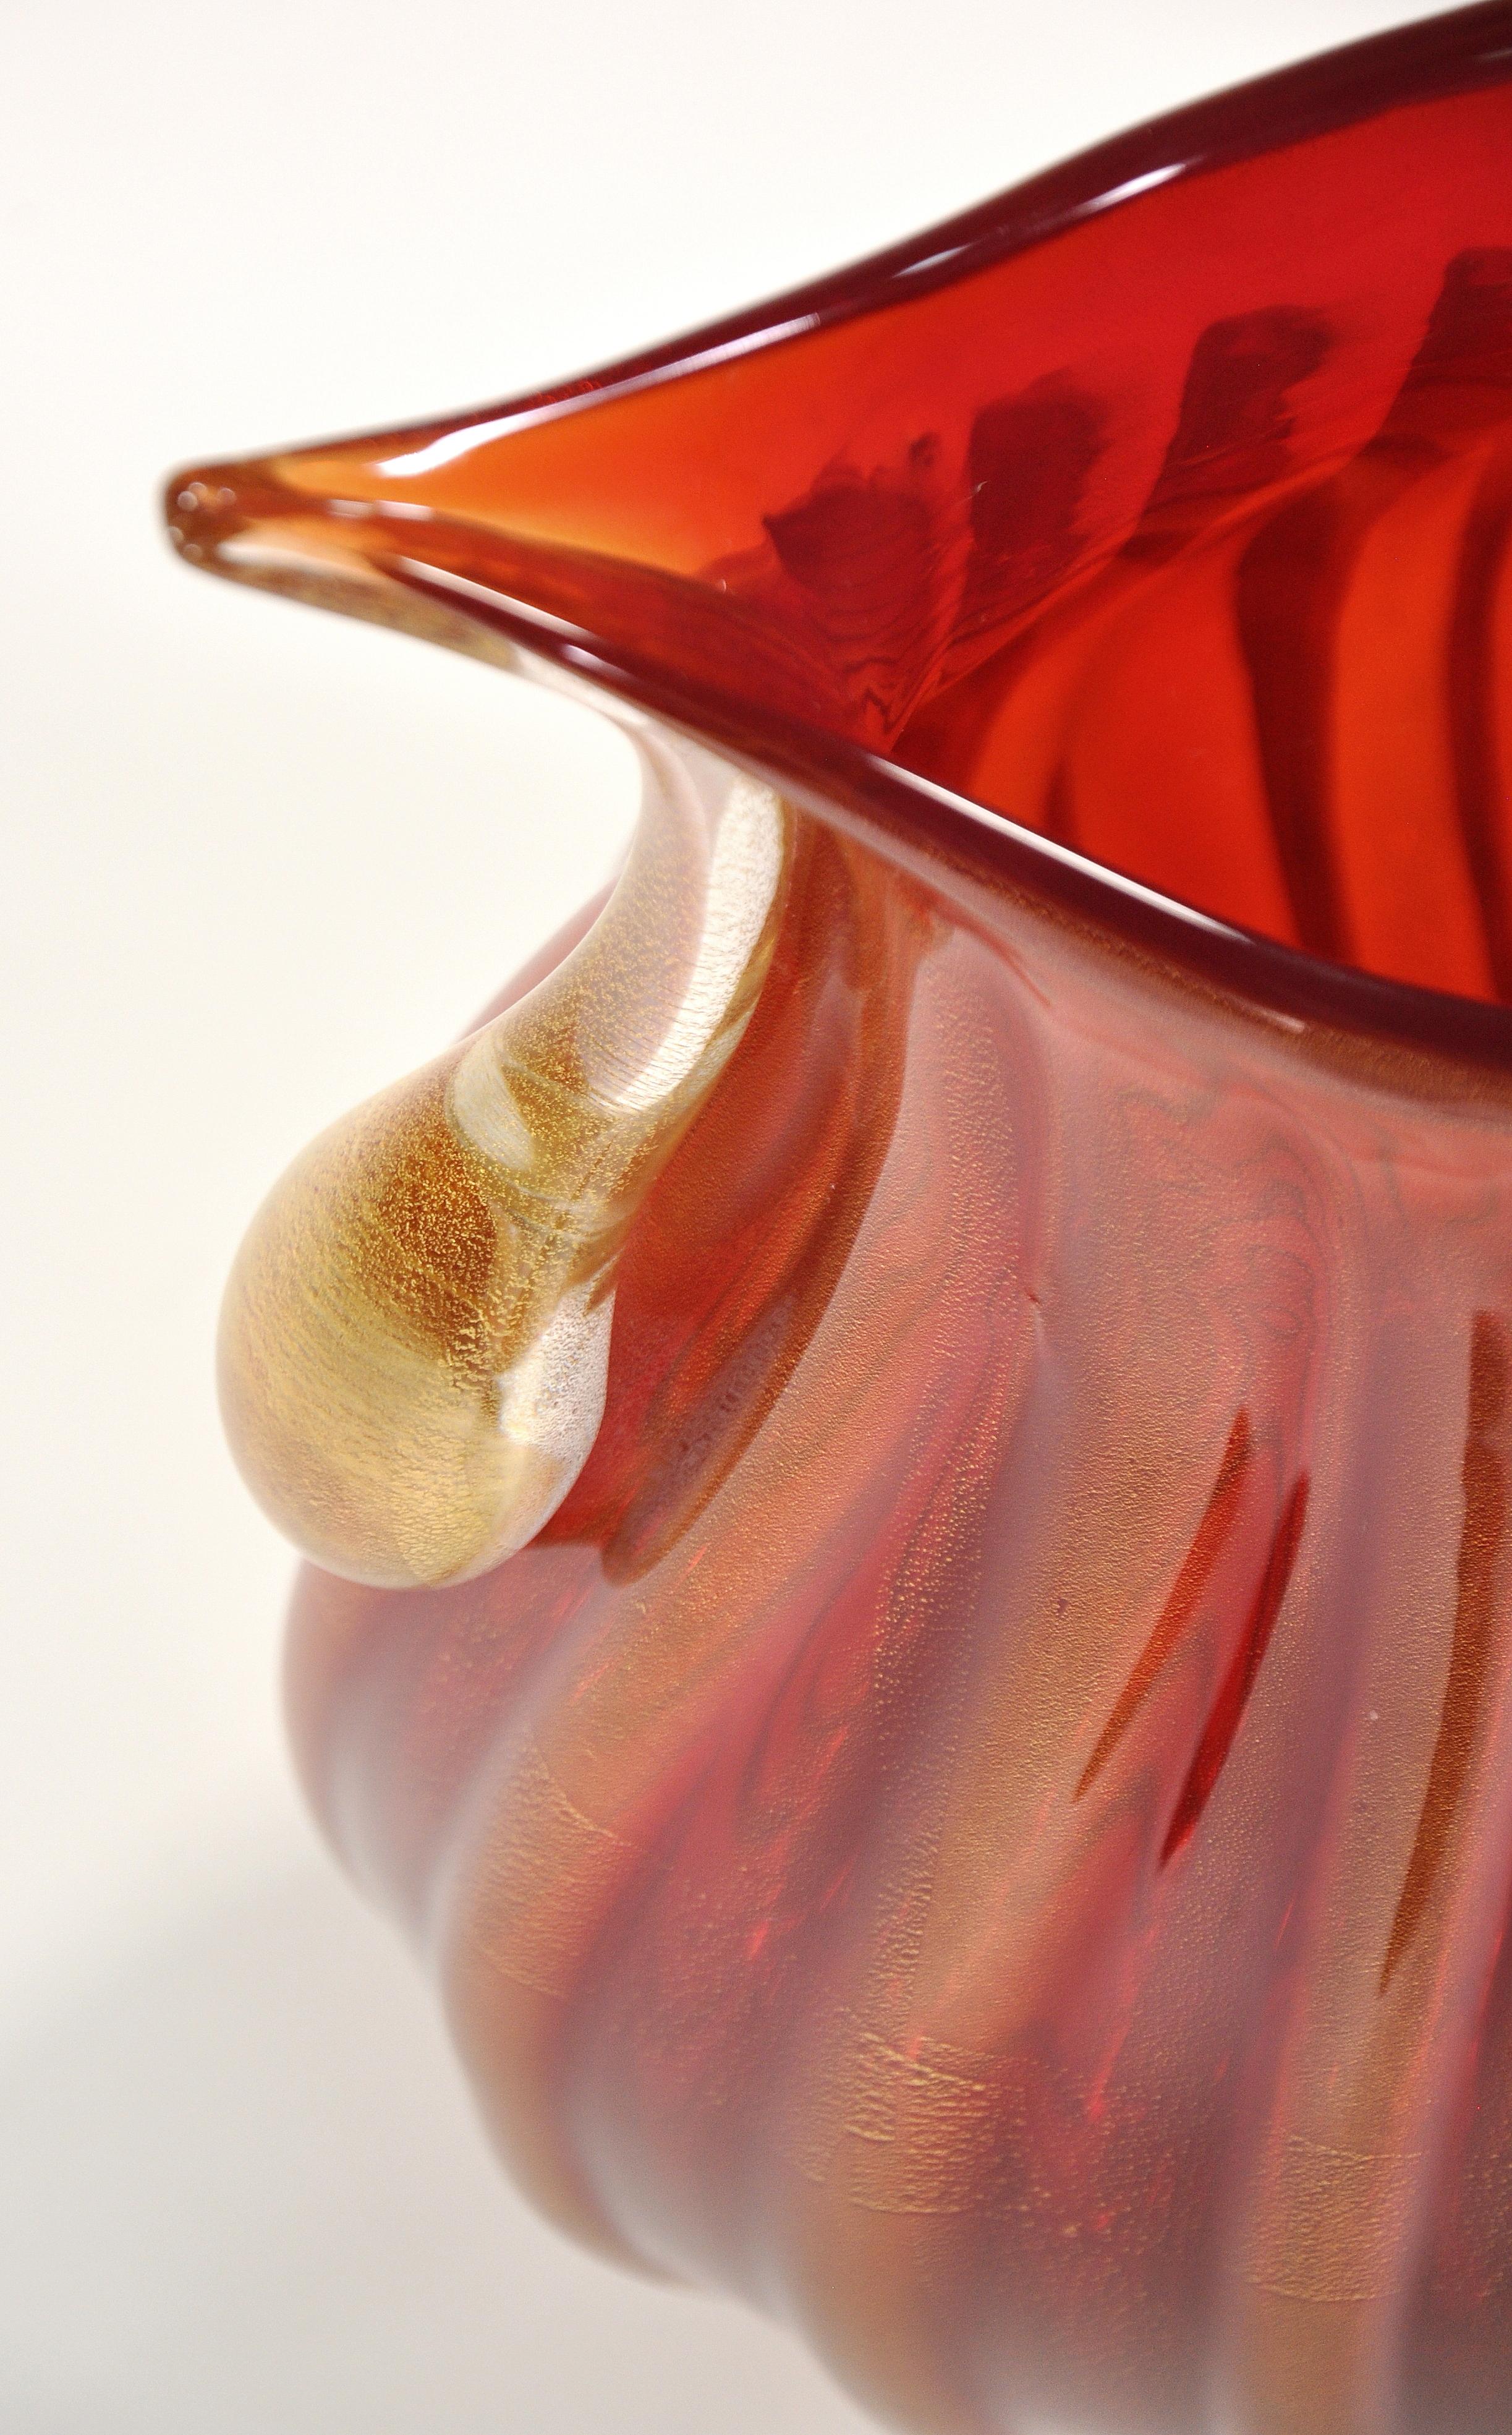 Large Pino Signoretto Red and Gold Murano Glass Vase, 1960s For Sale 5